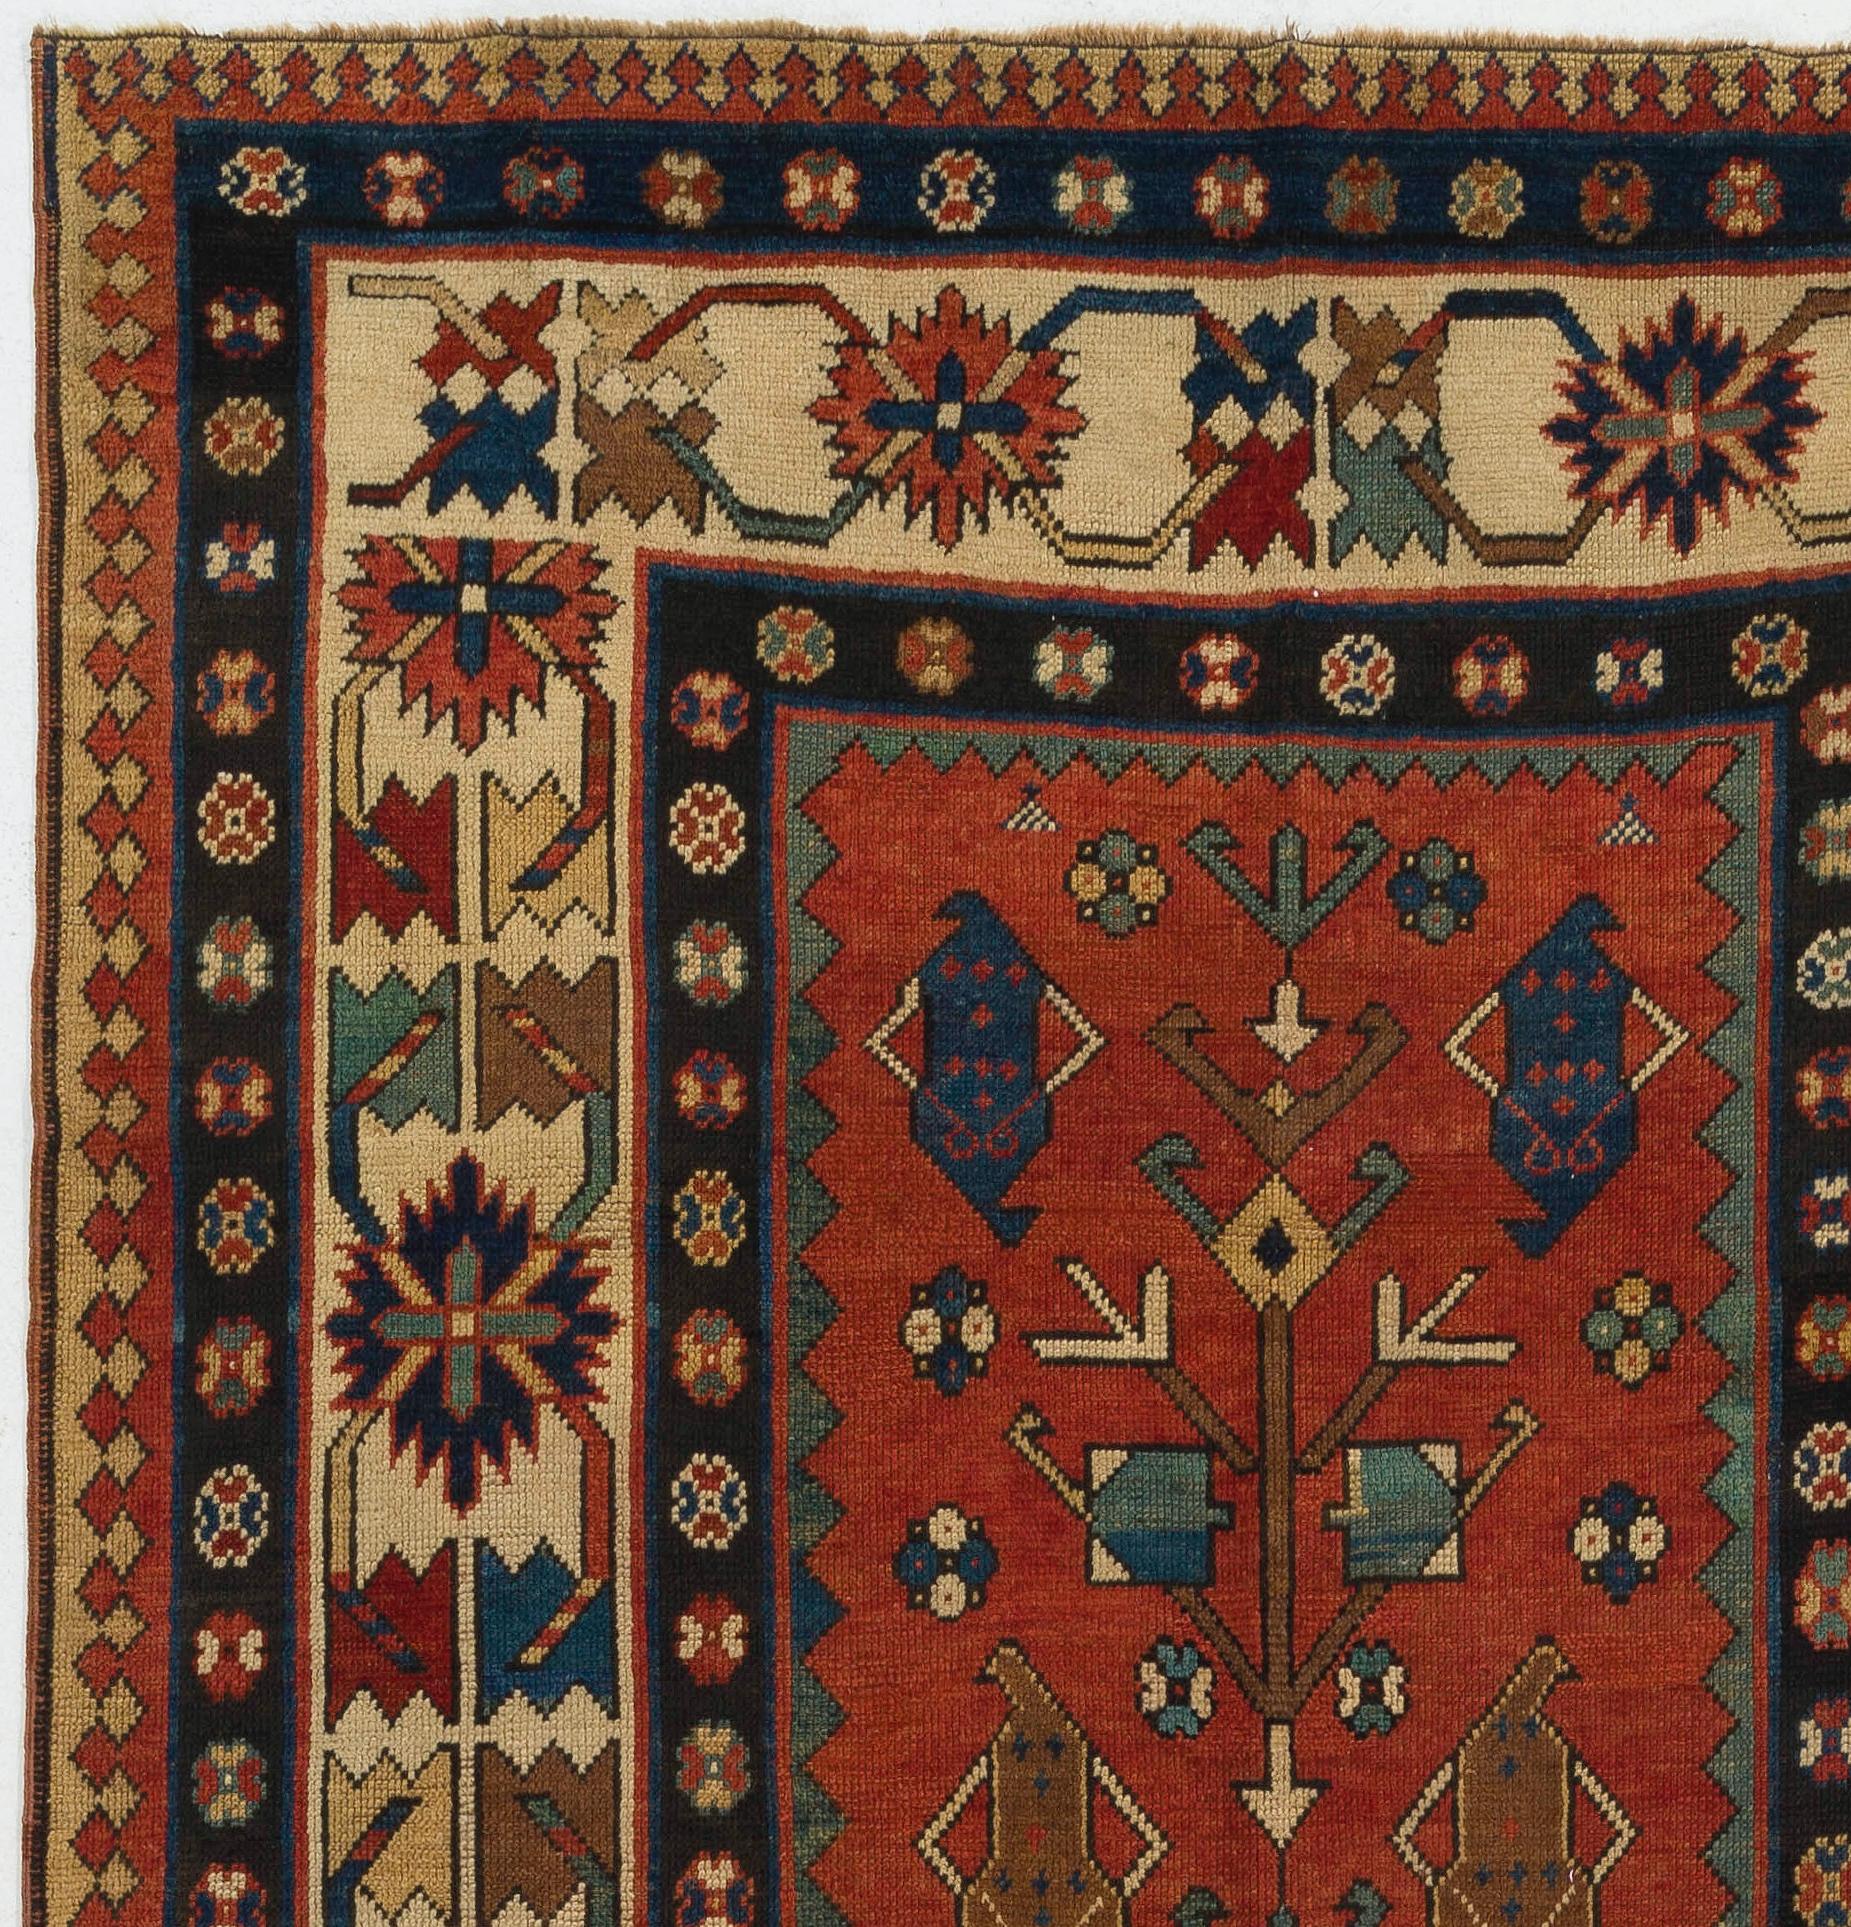 Antique Caucasian Karabagh Rug
Finely hand-knotted with even medium wool pile on wool foundation. Origin good condition. Sturdy and as clean as a brand new rug (deep washed 
Size: 5' x 8'3'' (145 x 250 cm)